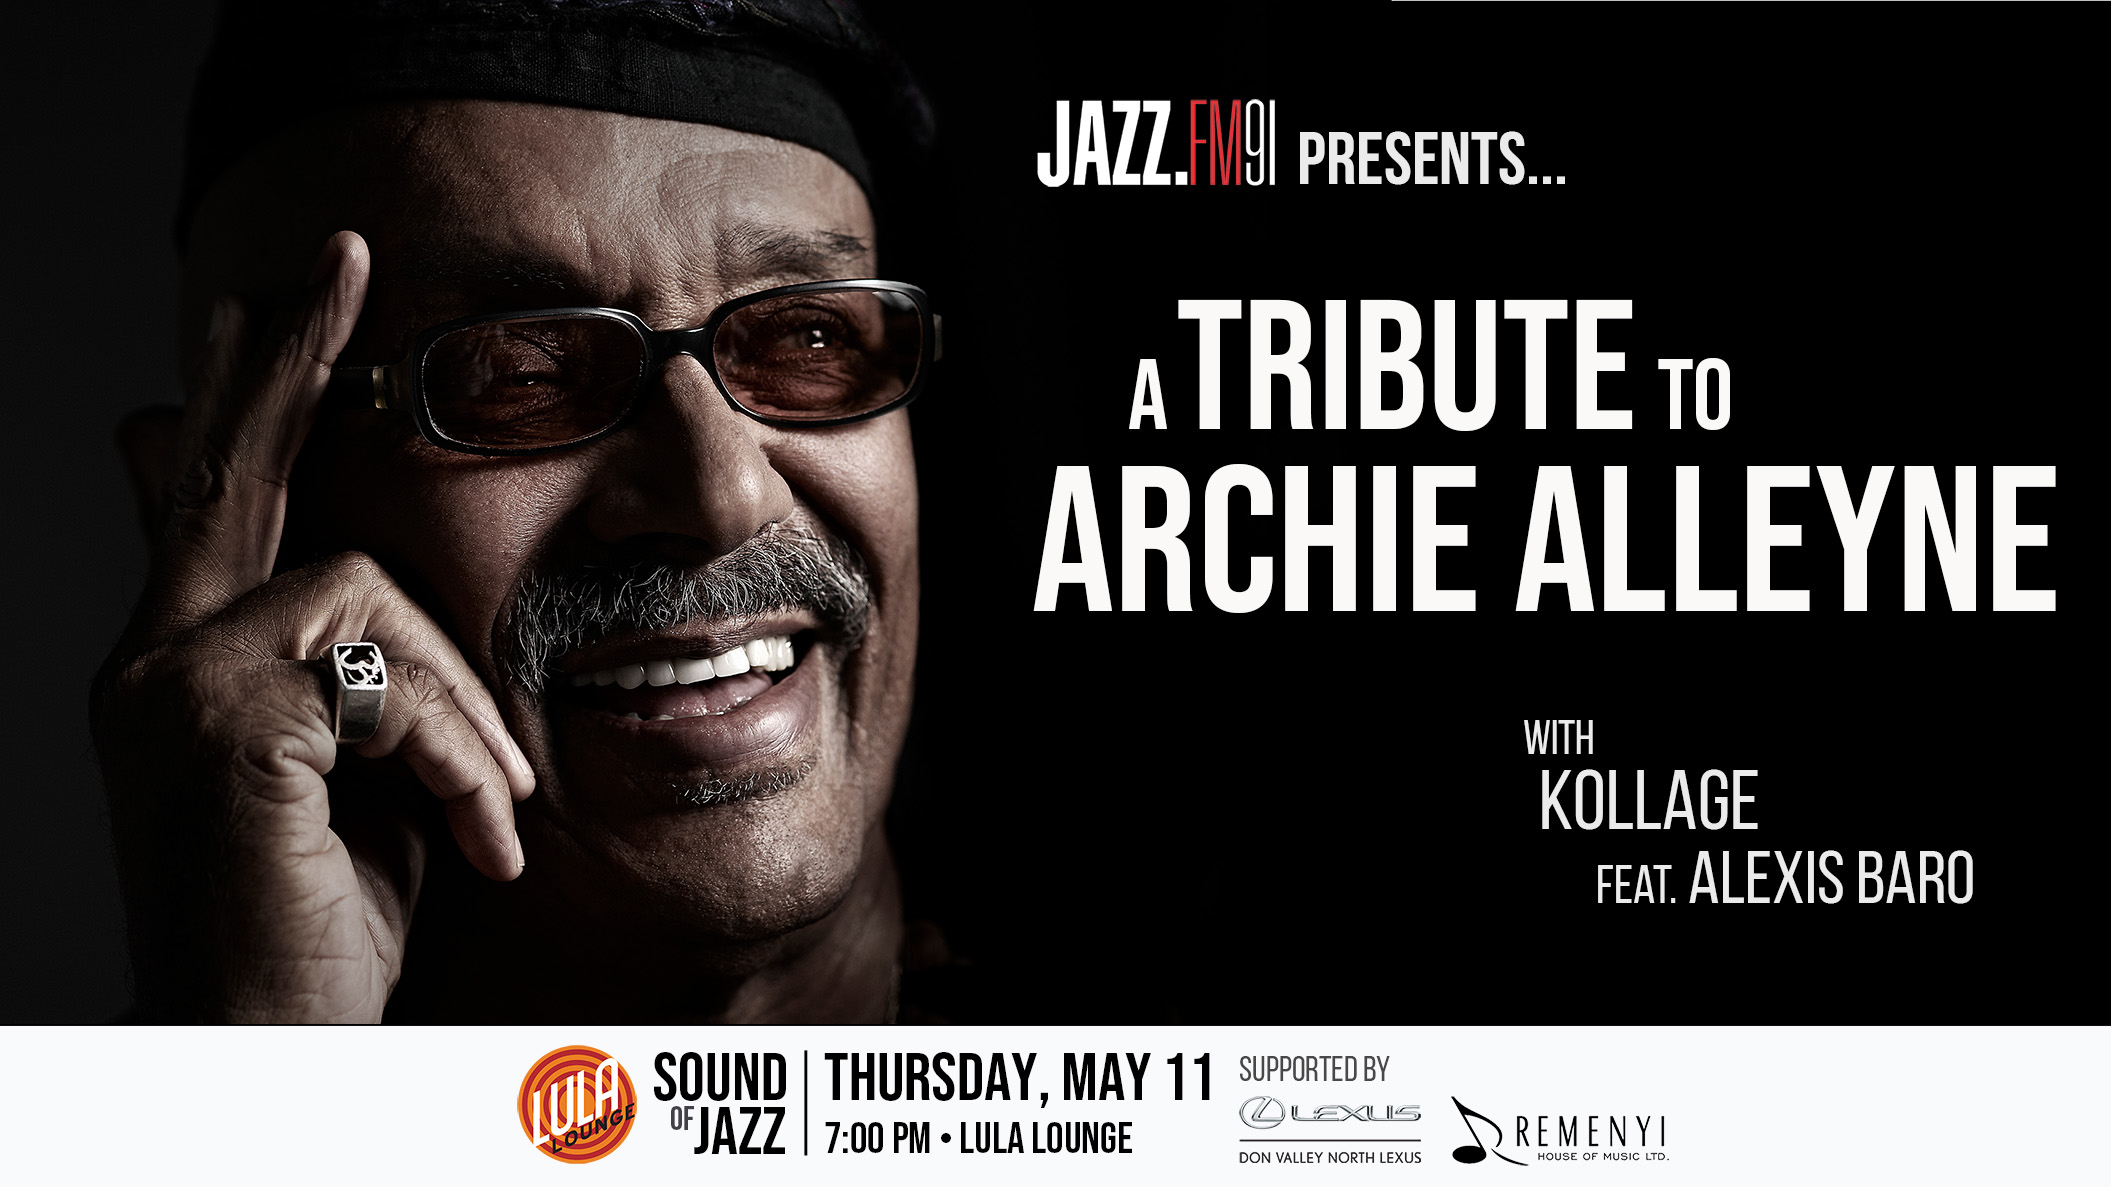 Sound of Jazz: A Tribute to Archie Alleyne with Kollage feat. Alexis Baro